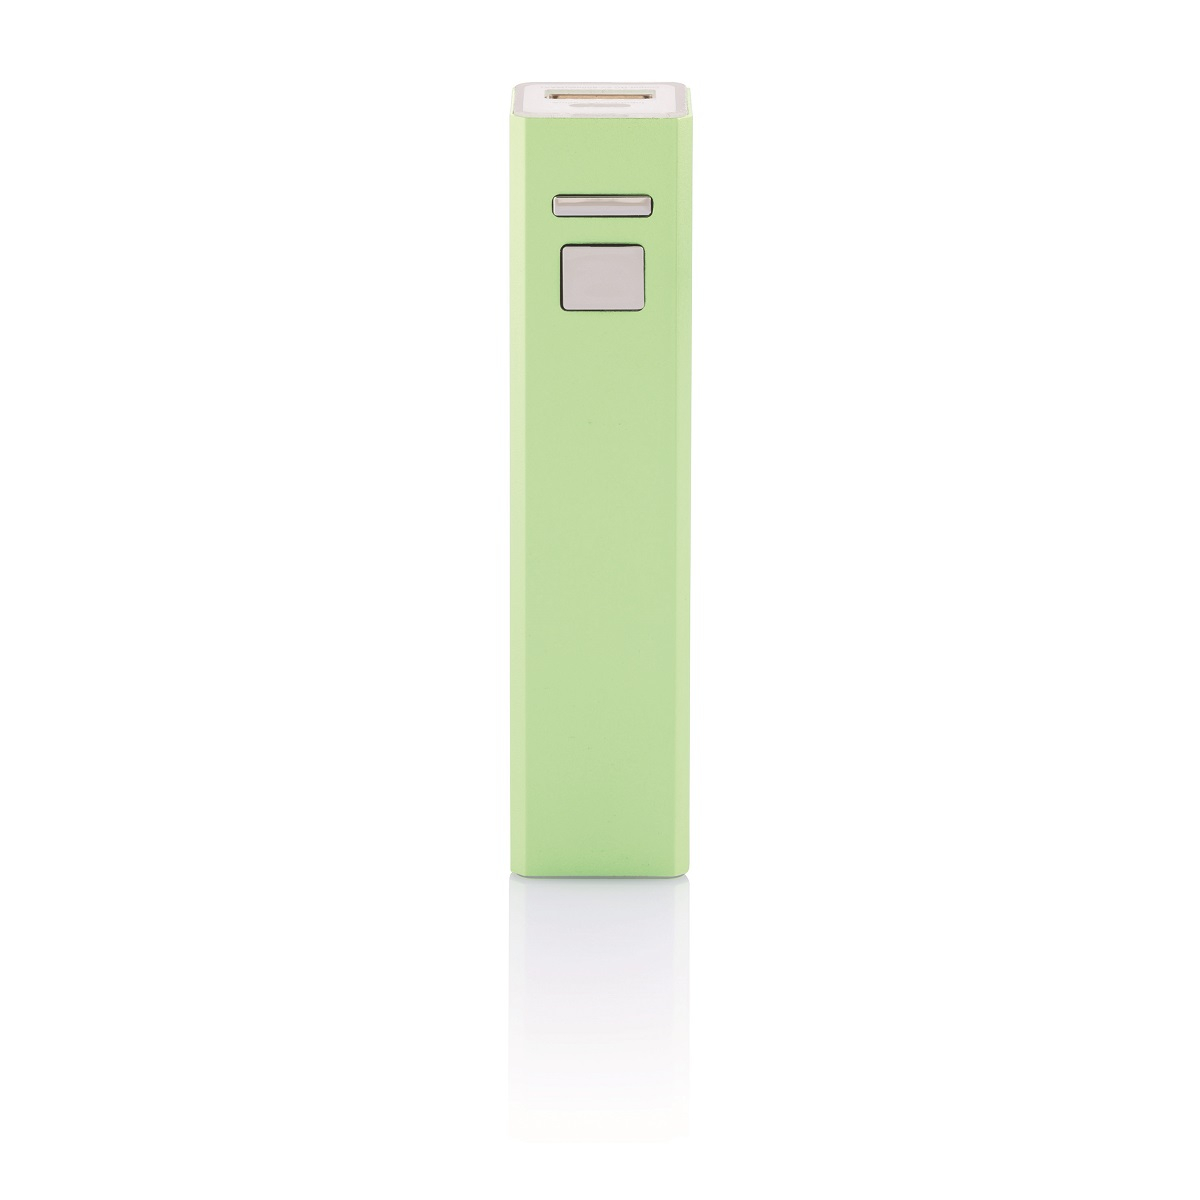 Image of Backup Battery in Lime